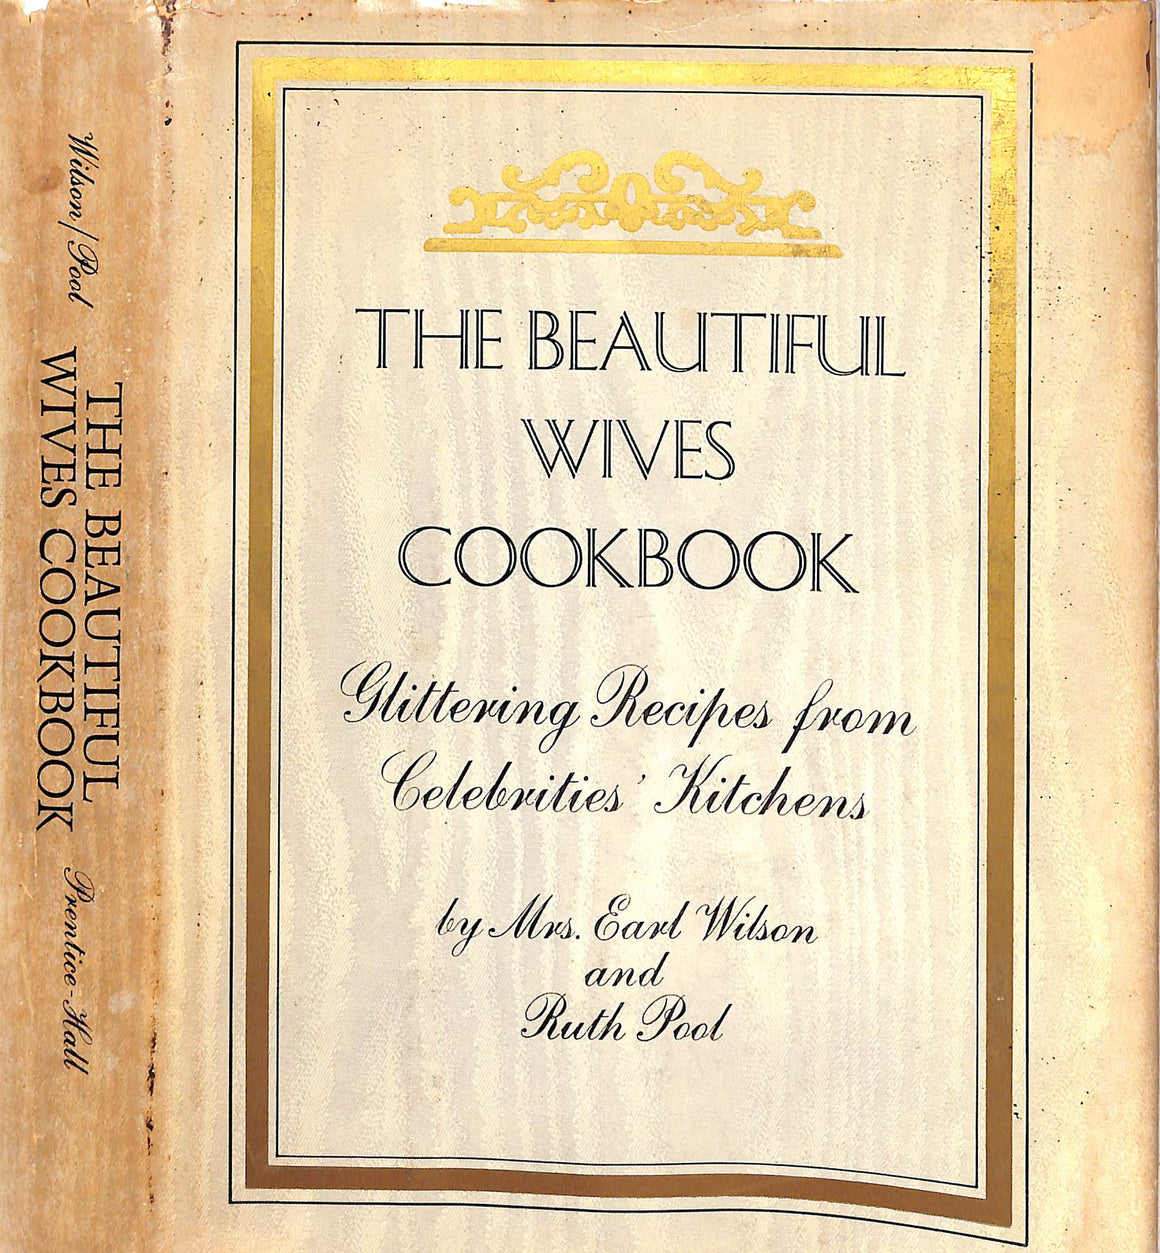 "The Beautiful Wives Cookbook: Glittering Recipes From Celebrities' Kitchens" 1970 WILSON, Mrs. Earl and POOL, Ruth